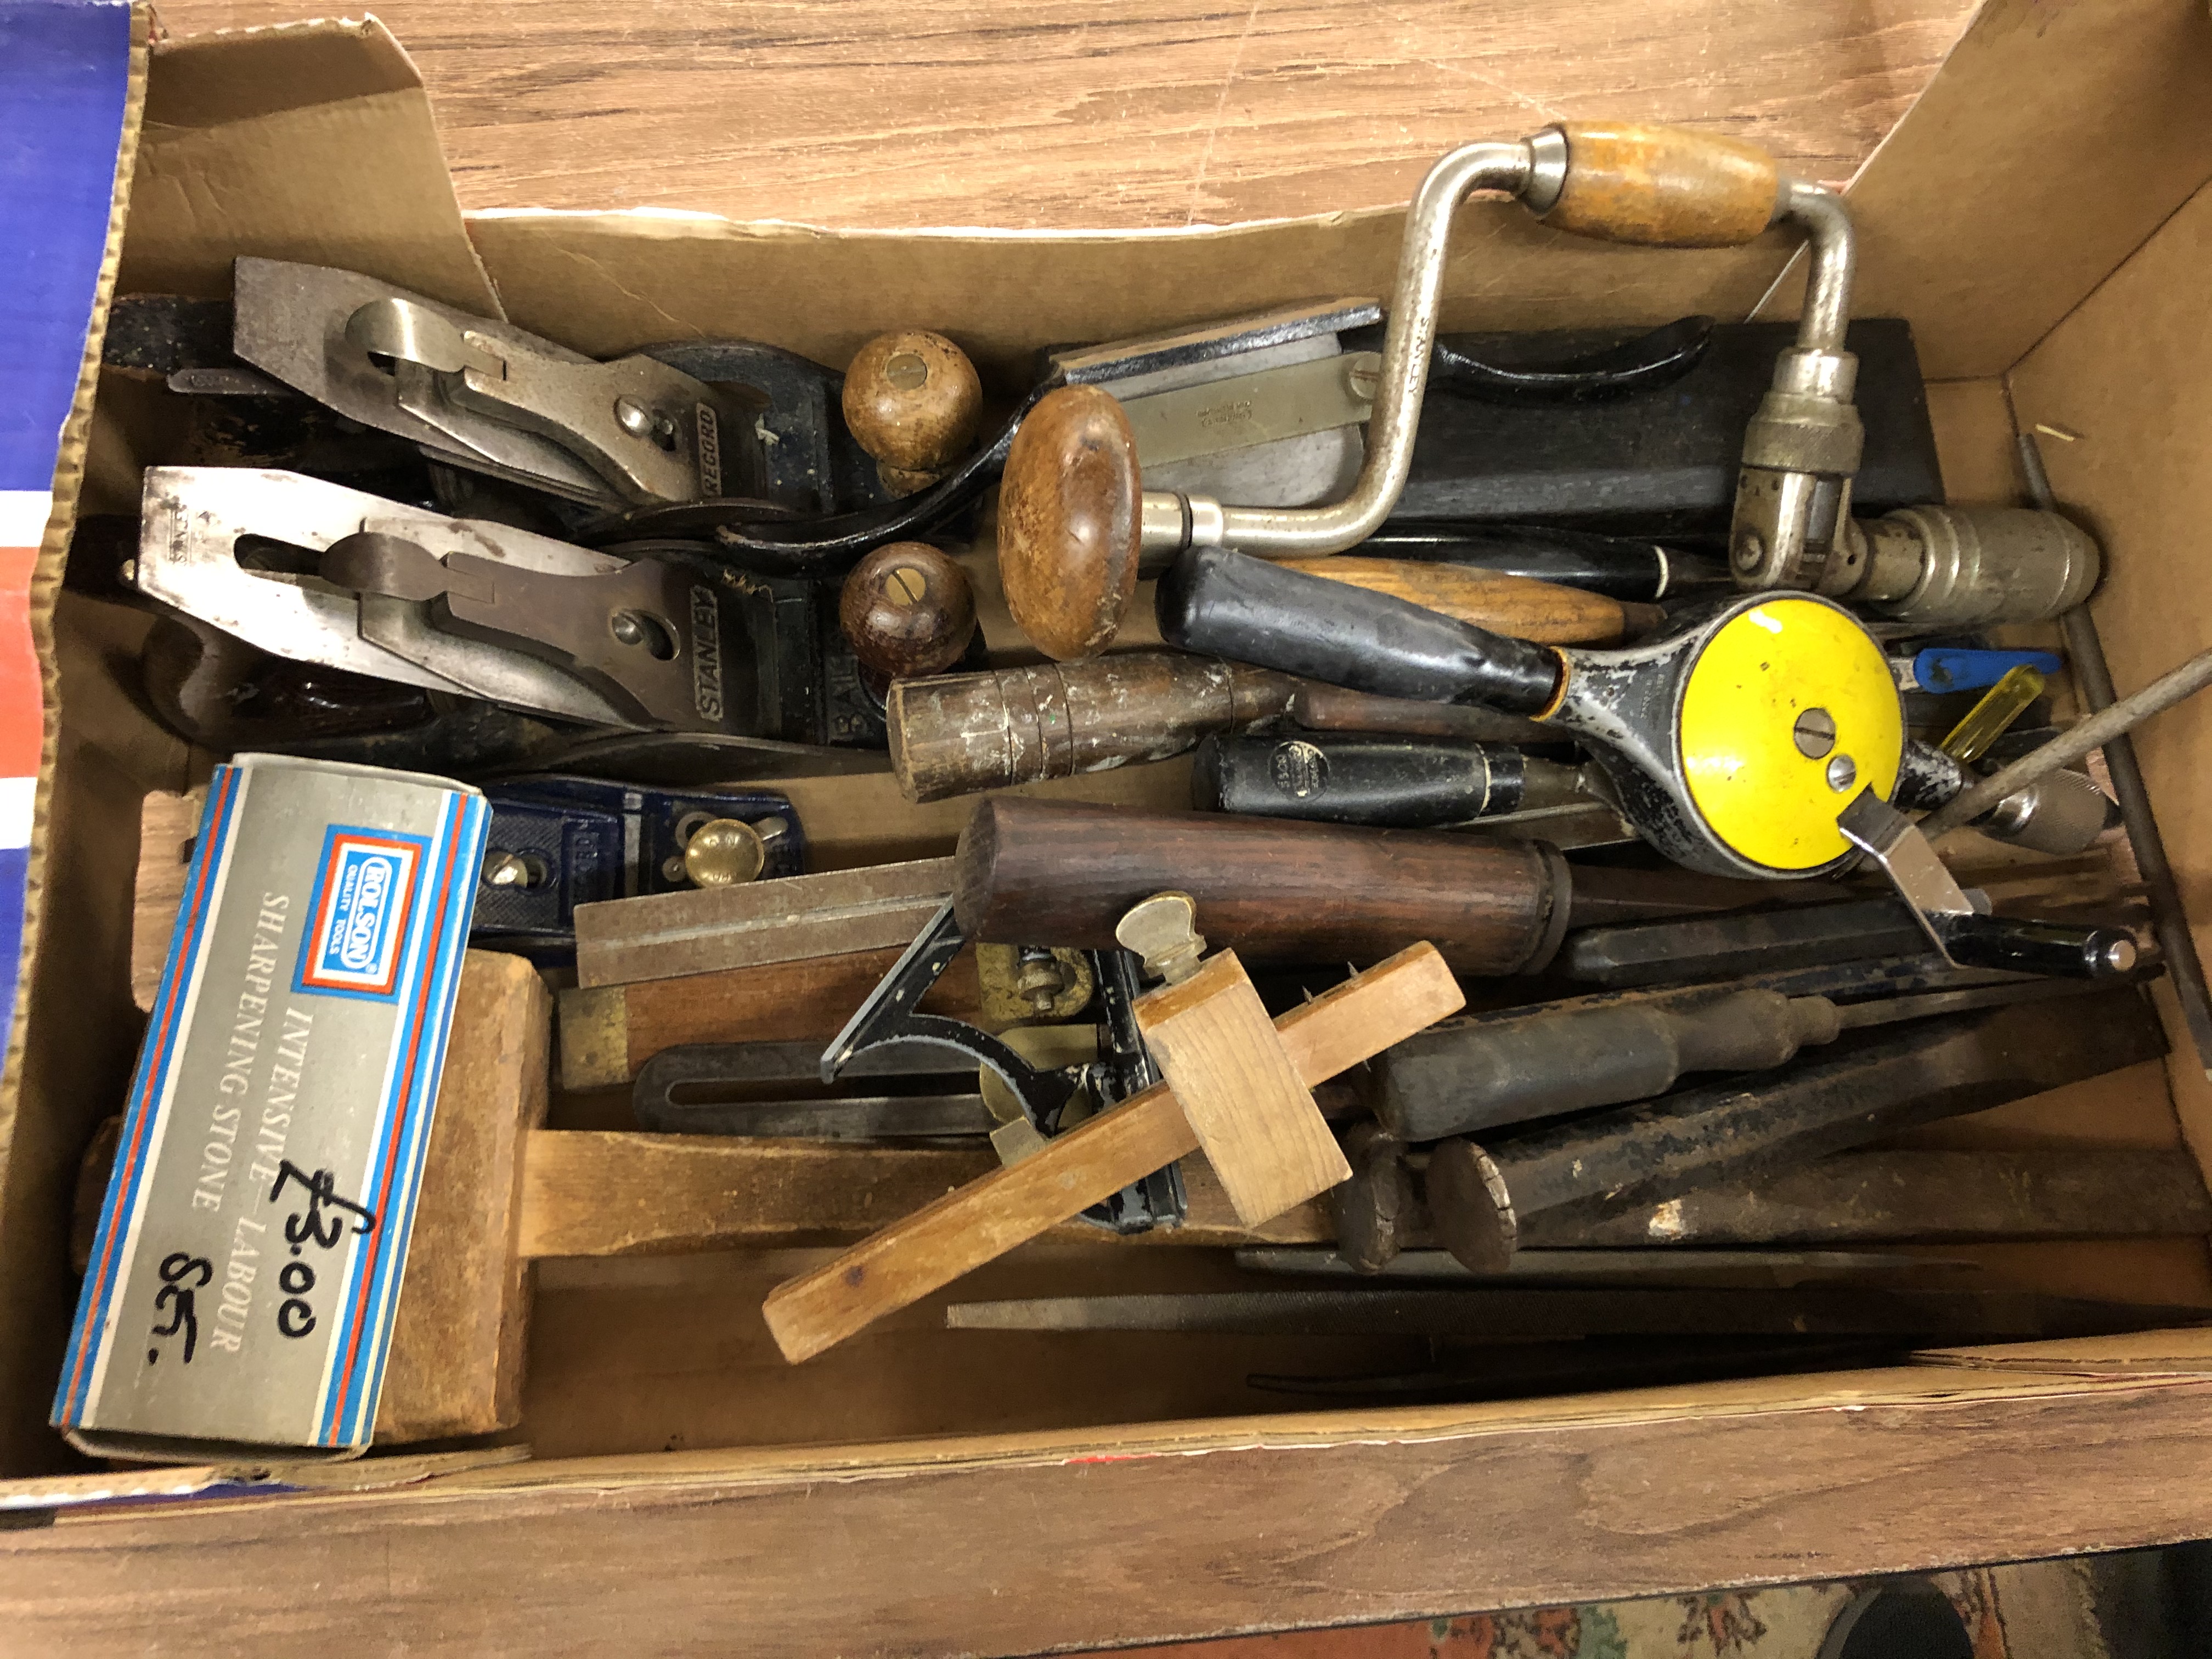 CARTON OF CARPENTRY TOOLS INCLUDING STANLEY AND RECORD PLANES, SPOKE SHAVE, SHARPENING BLOCK,